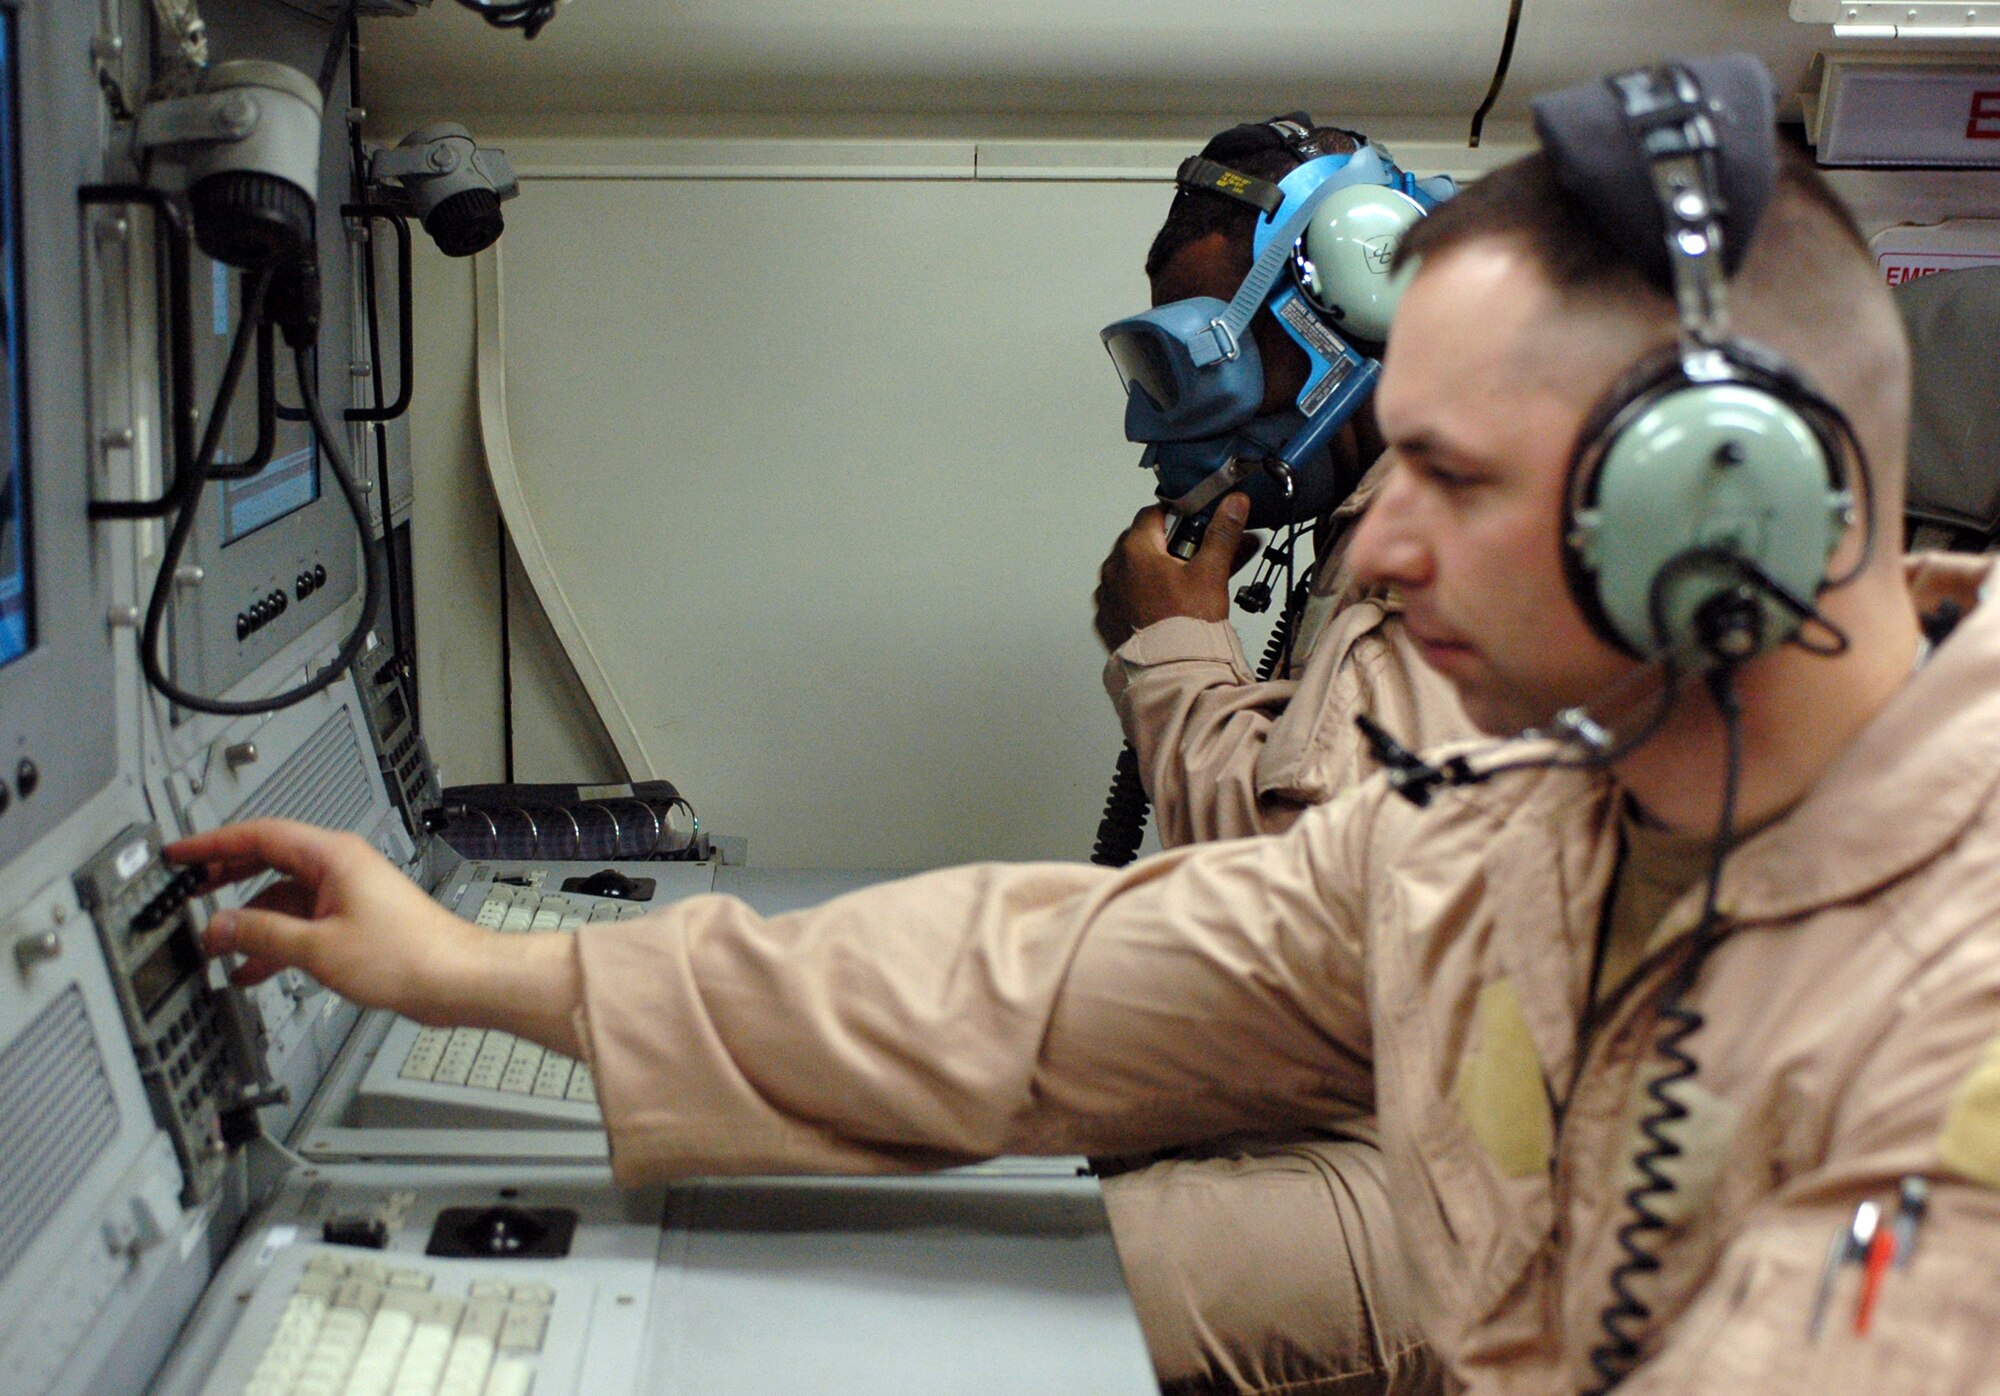 Army Maj. Darryl Verrett (rear) ensures his oxygen mask works properly while Capt. Stefan Essig begins a computer systems check aboard an E-8C Joint Surveillance Target Attack Radar System aircraft prior to takeoff from an air base in Southwest Asia.  JSTARS crews provide support to both air and ground forces.  Major Verrett is the deputy mission crew commander and Captain Essig is a senior mission director with the 116th Expeditionary Airborne Command and Control Squadron.  (U.S. Air Force photo/Staff Sgt. Jason Barebo)